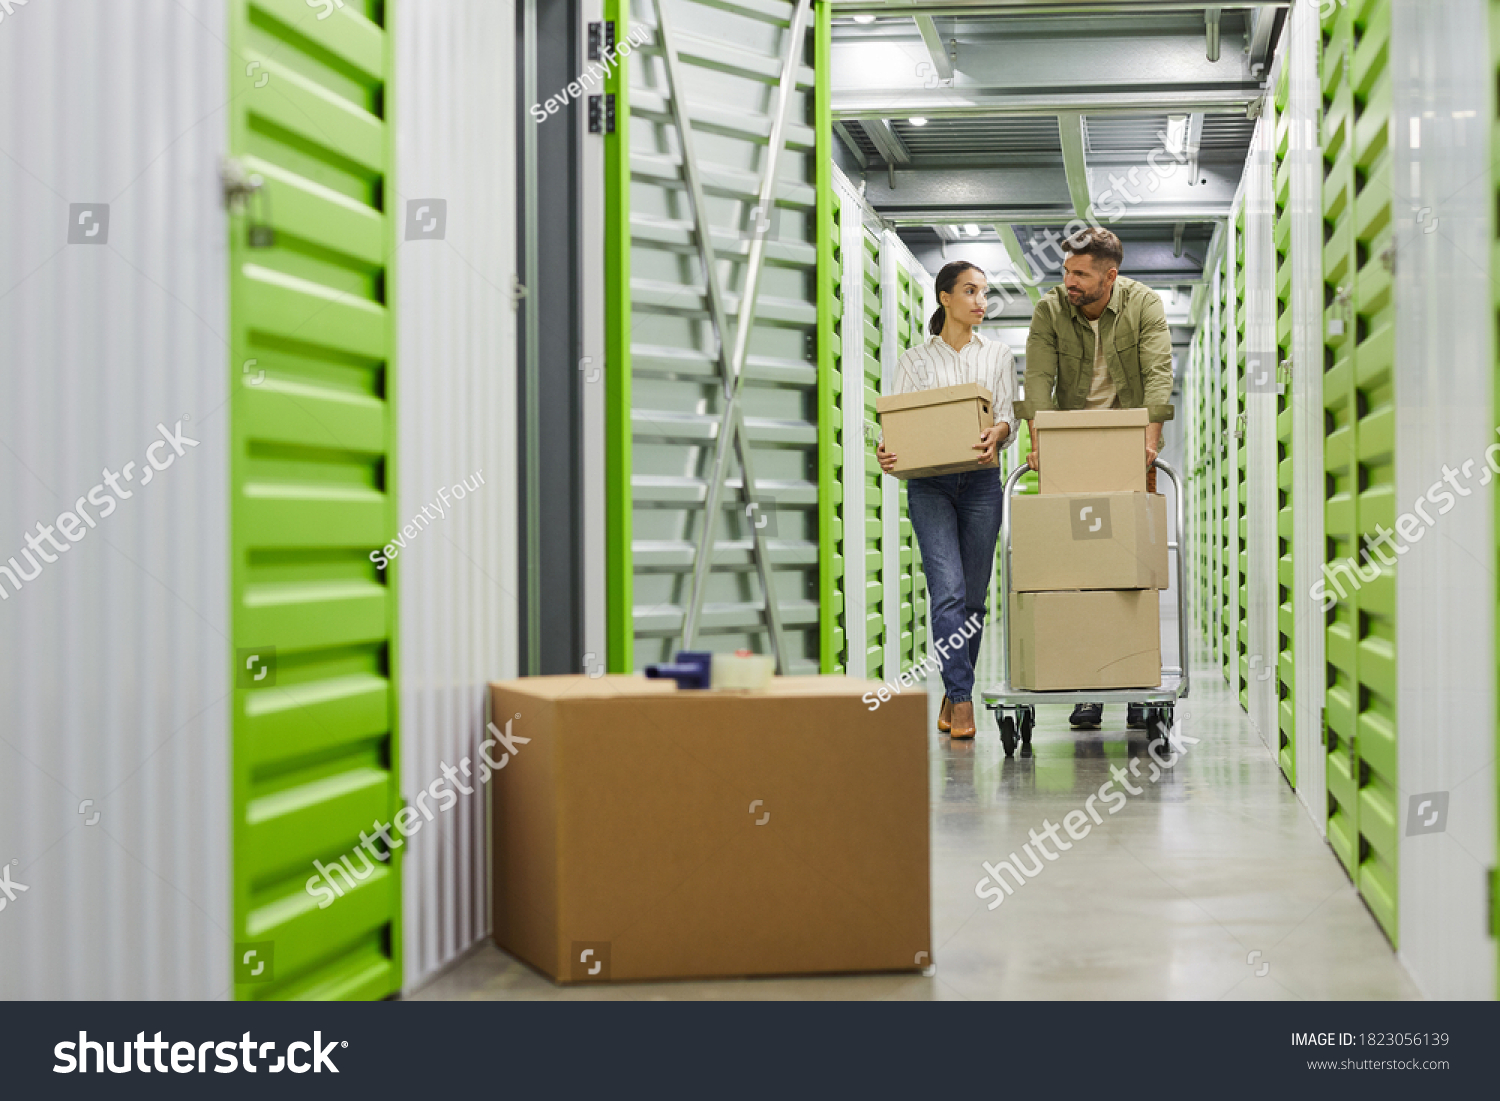 Full length portrait of young couple holding cardboard boxes walking towards camera in self storage unit, copy space #1823056139